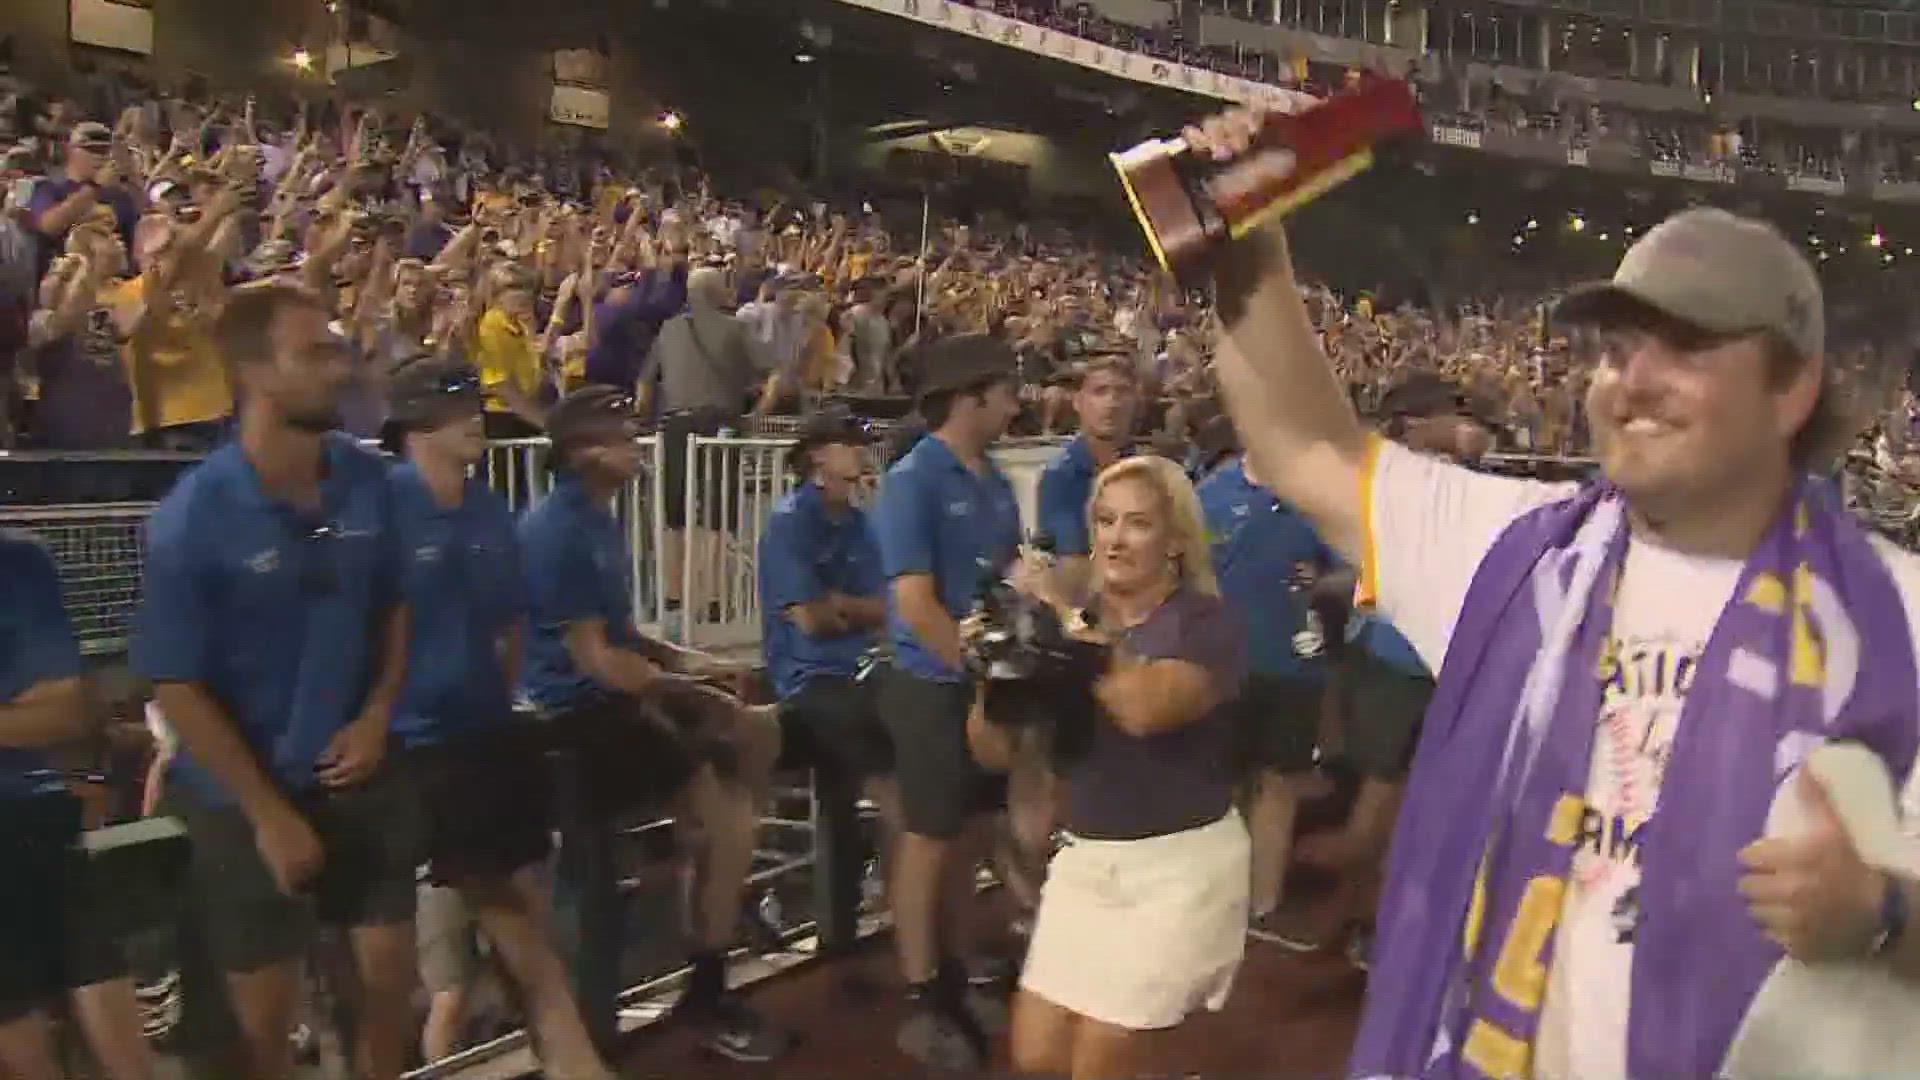 LSU drubbed Florida to win its 7th College World Series title in Omaha Monday night.